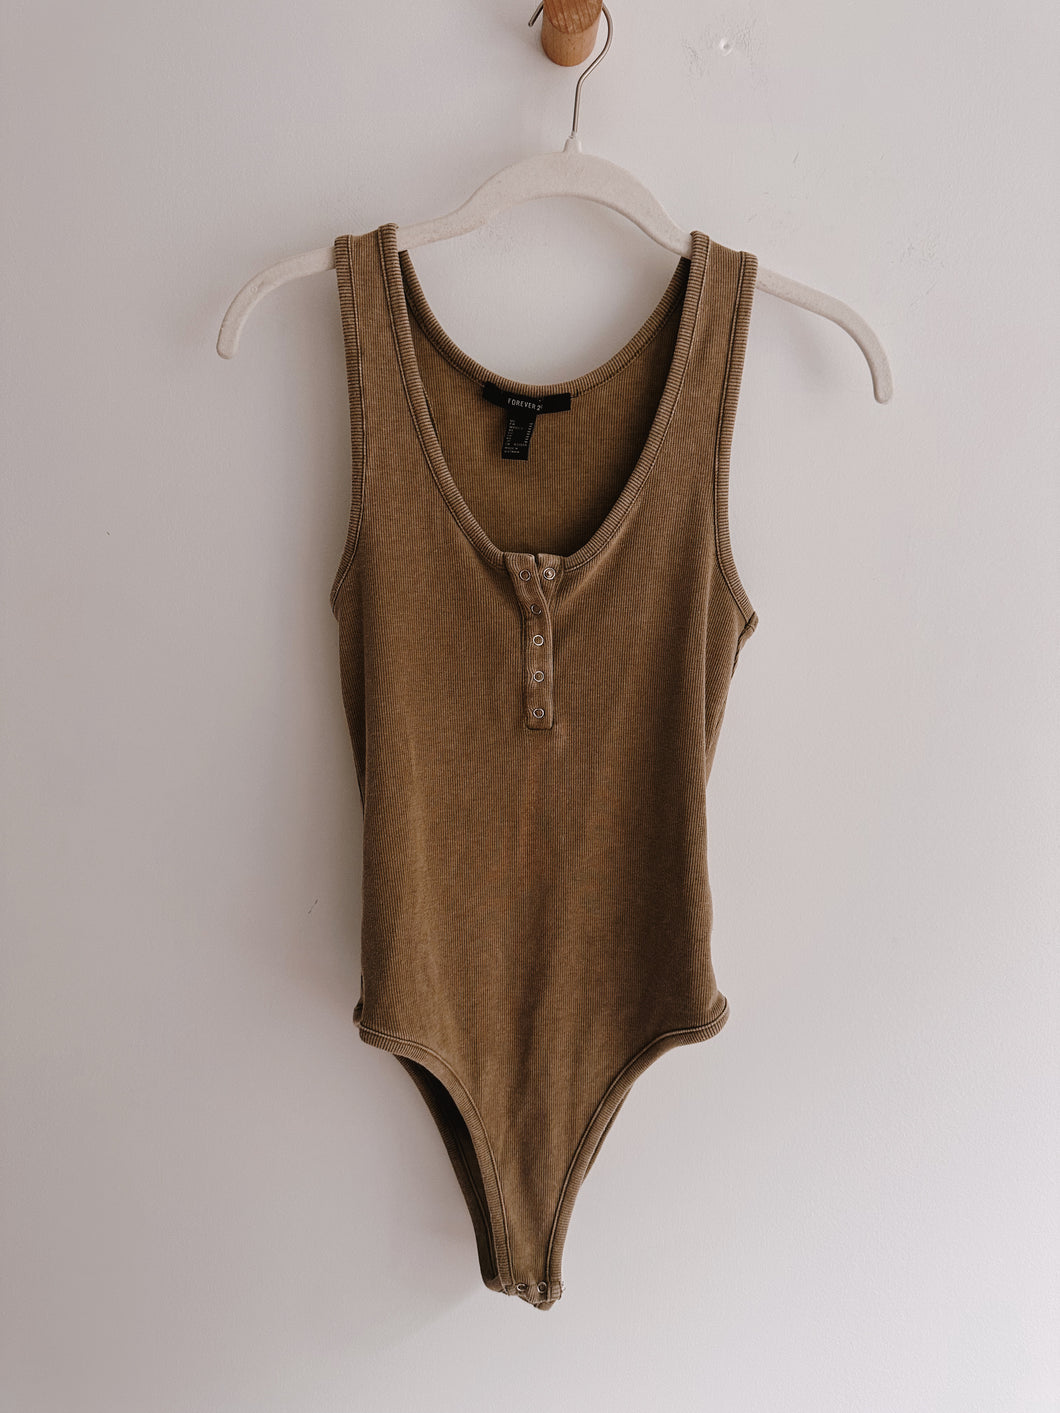 Forever 21 Brown Bodysuit - Size M